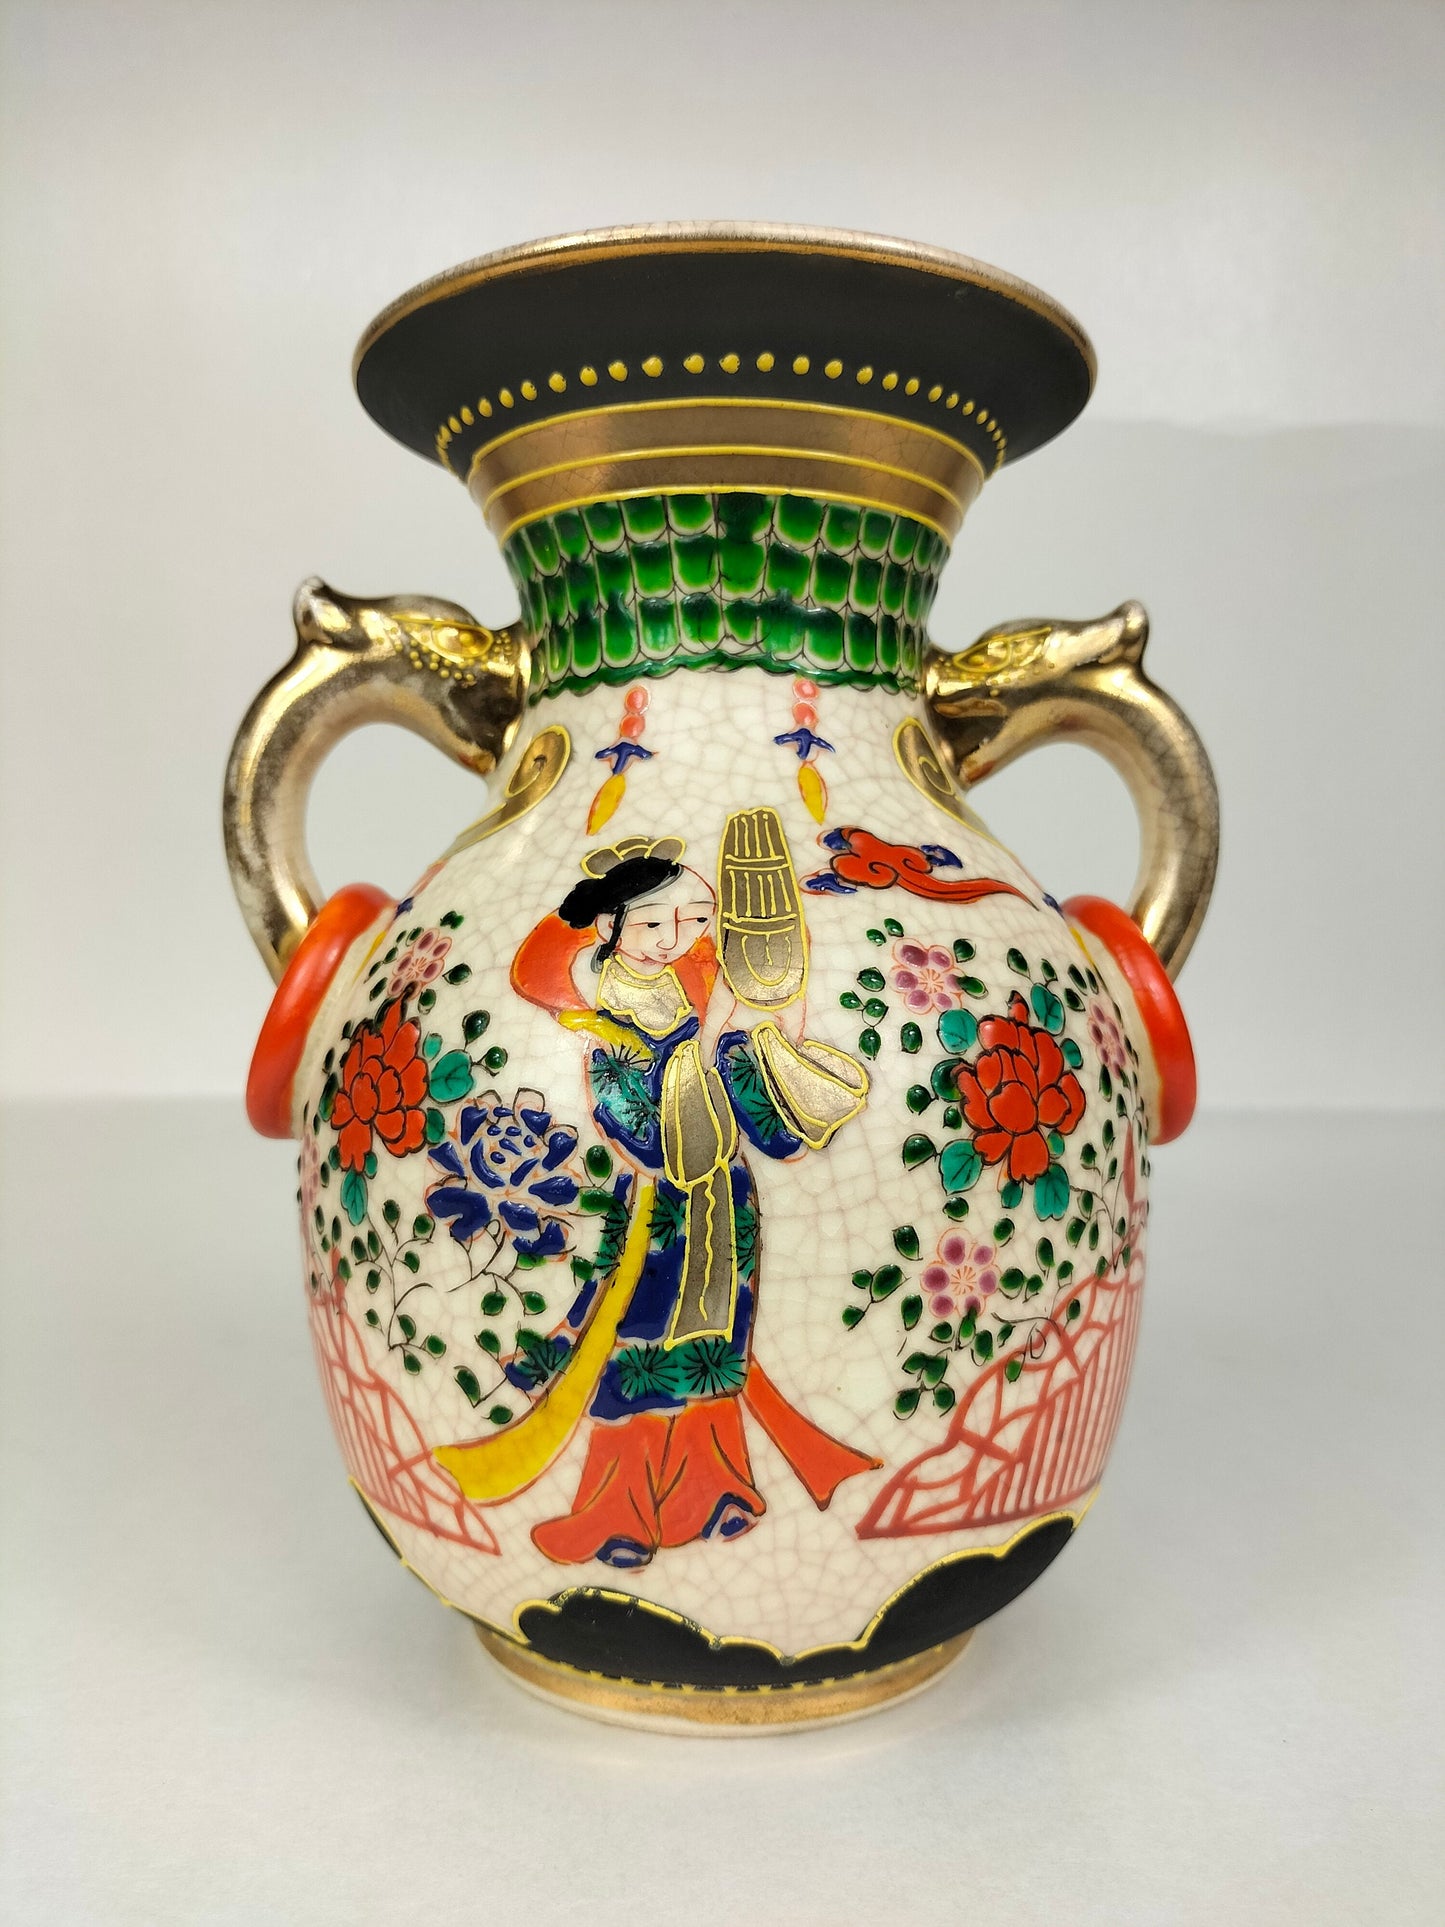 Antique Japanese satsuma vase decorated with figures and flowers // Japan - Early 20th century